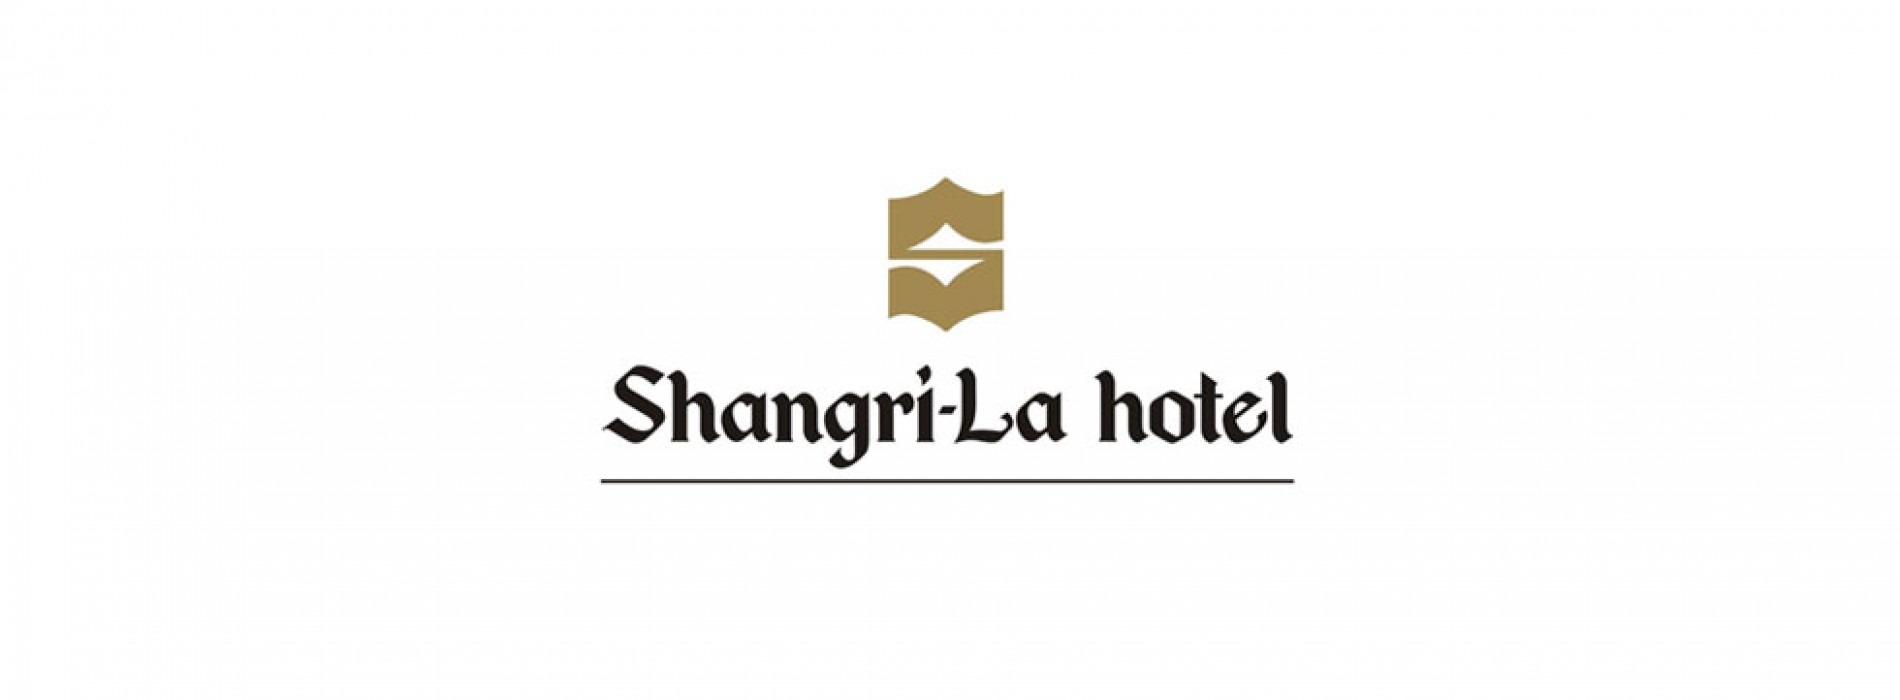 Shangri-La Hotel, Bengaluru Receives Leed India New Construction Gold Certification from IGBC